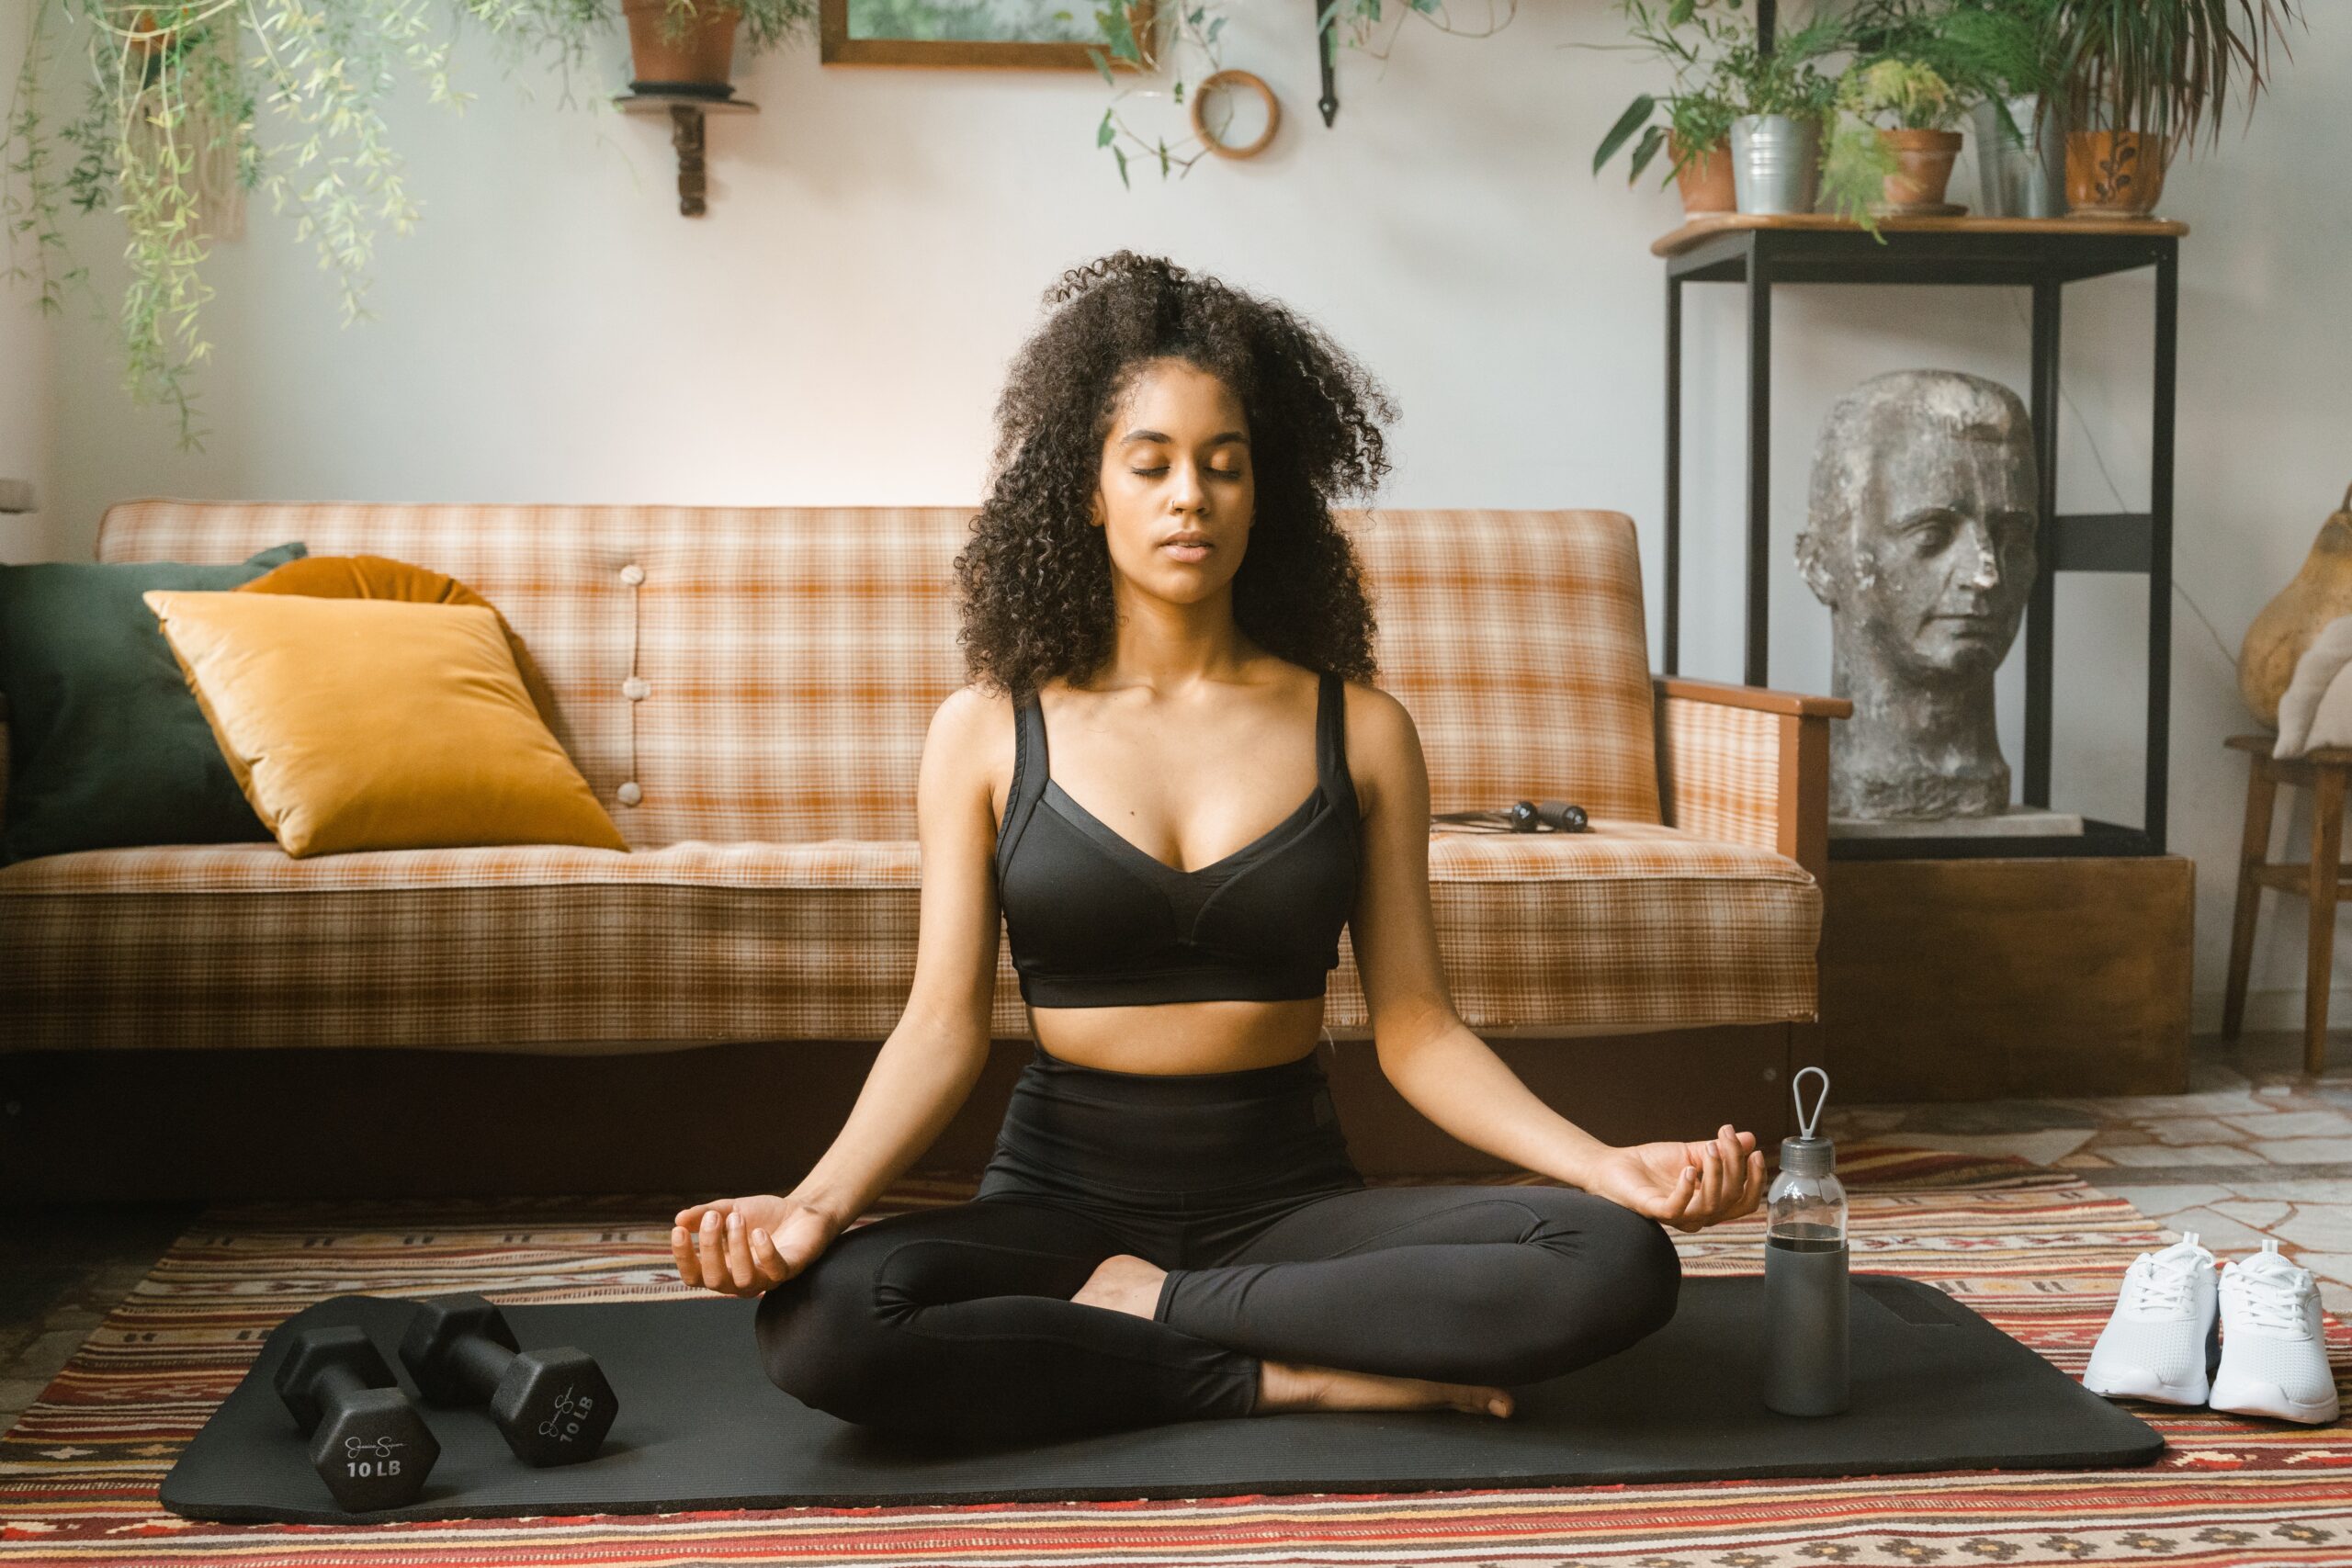 Black woman meditating, how to let go of OCD thoughts.